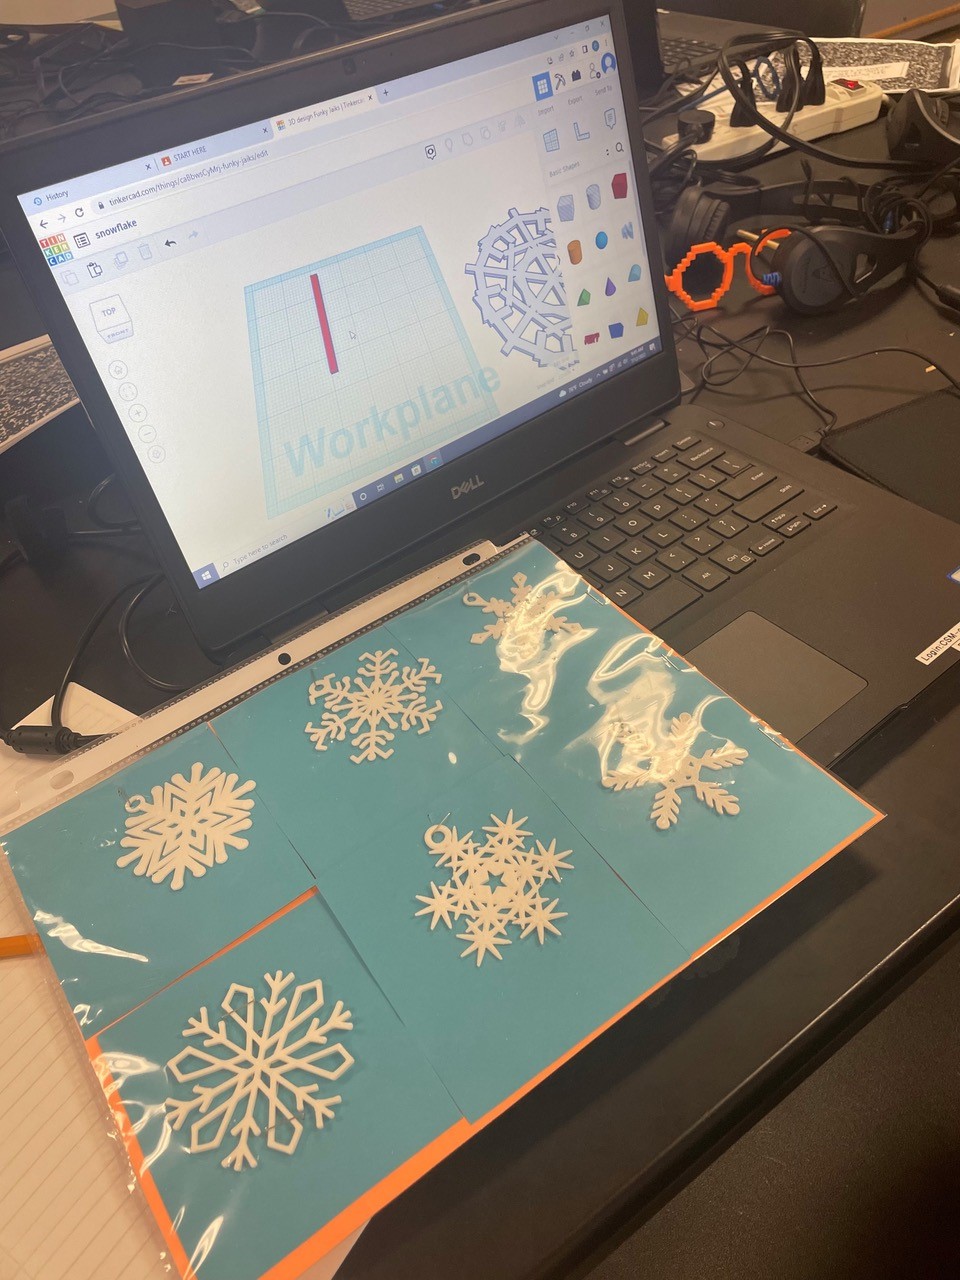 Students attending SCORE’s introductory 3D printing and design camp designed and printed snowflakes.